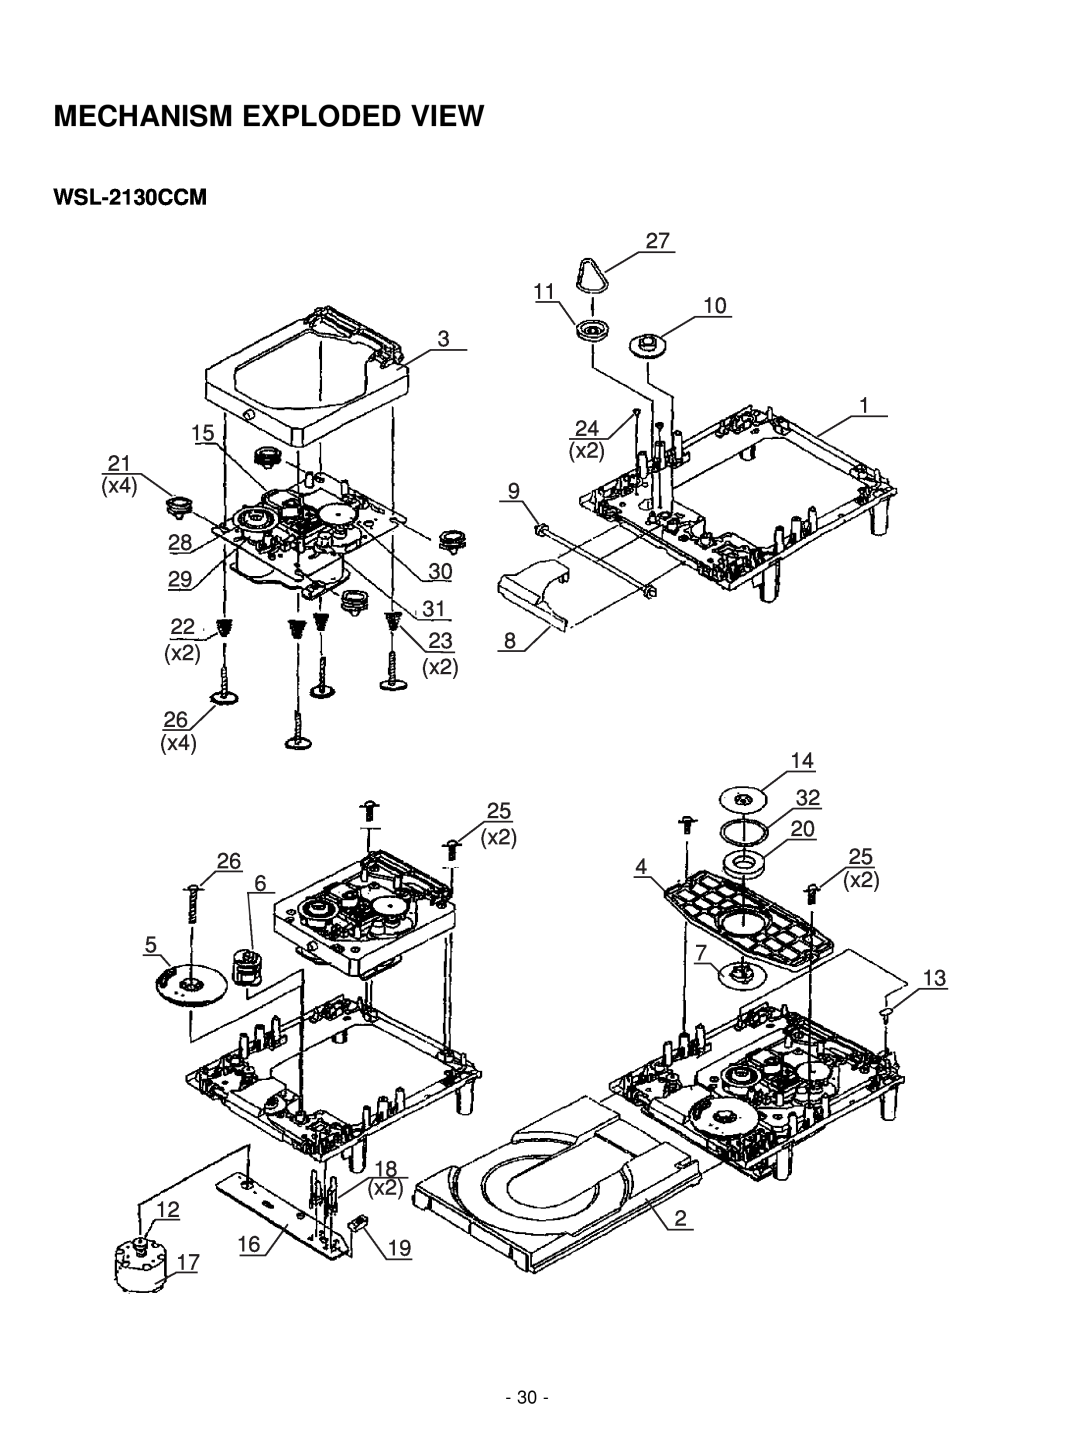 NAD C 542 service manual Mechanism Exploded View, WSL-2130CCM 